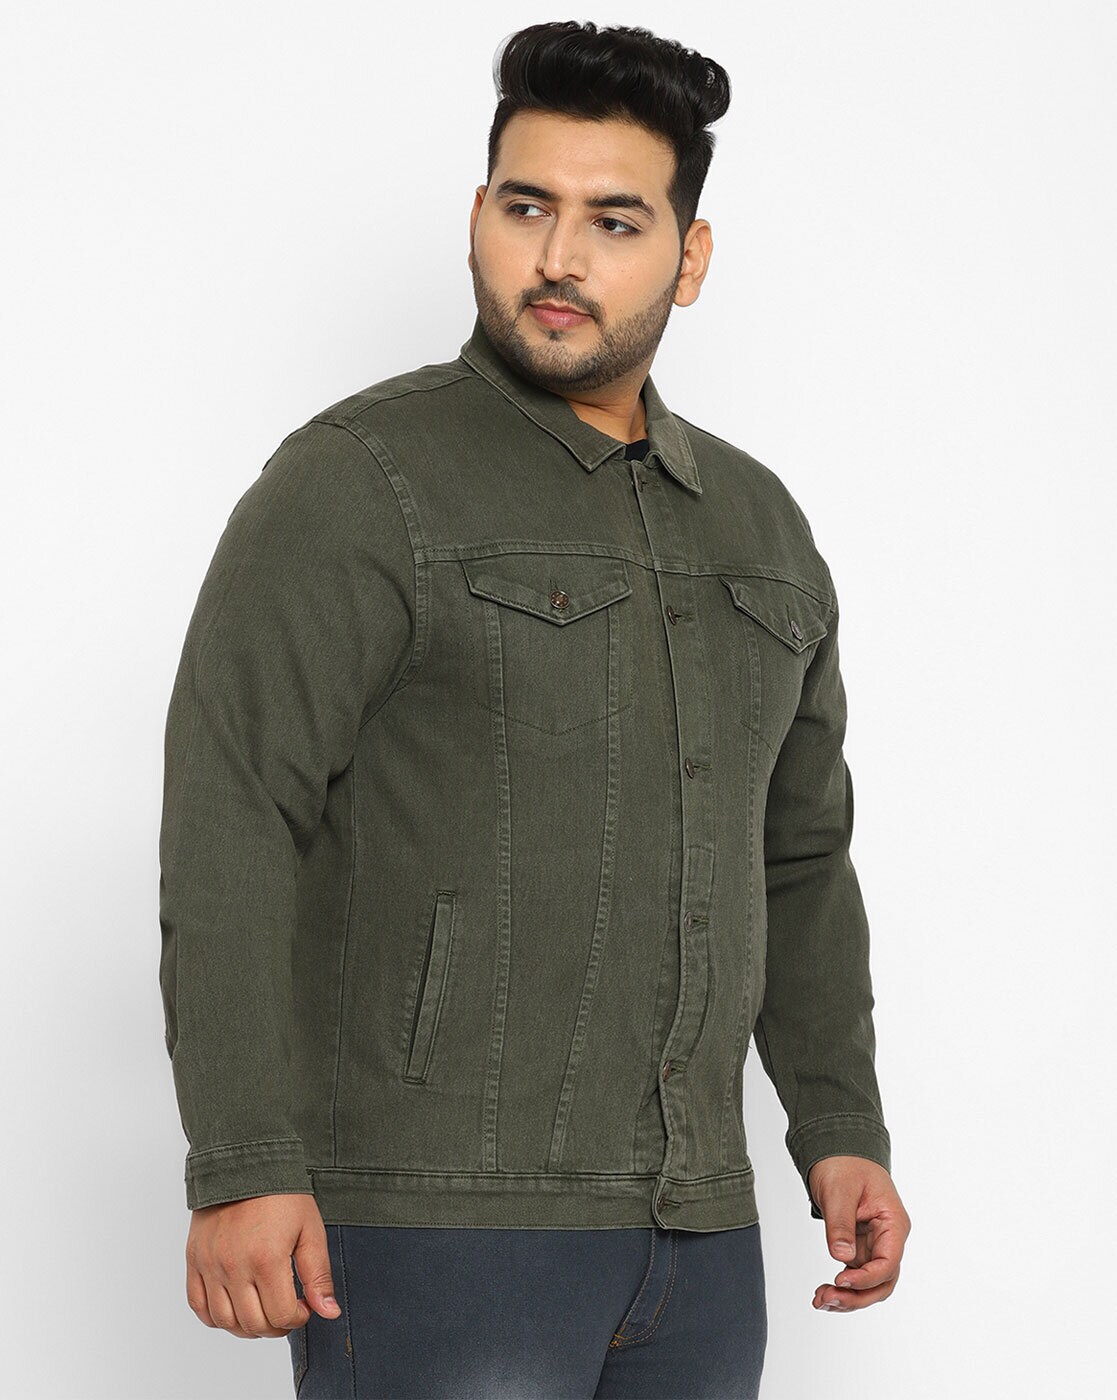 Gravel Gear Jacket Mens Fashion Denim Coat Casual Solid Color Jacket  Cardigan Button Work Coat Shirt Insulated Flannel Bench Winter Jacket Lined  Mens Jacket Olive Trench Coat - Walmart.com